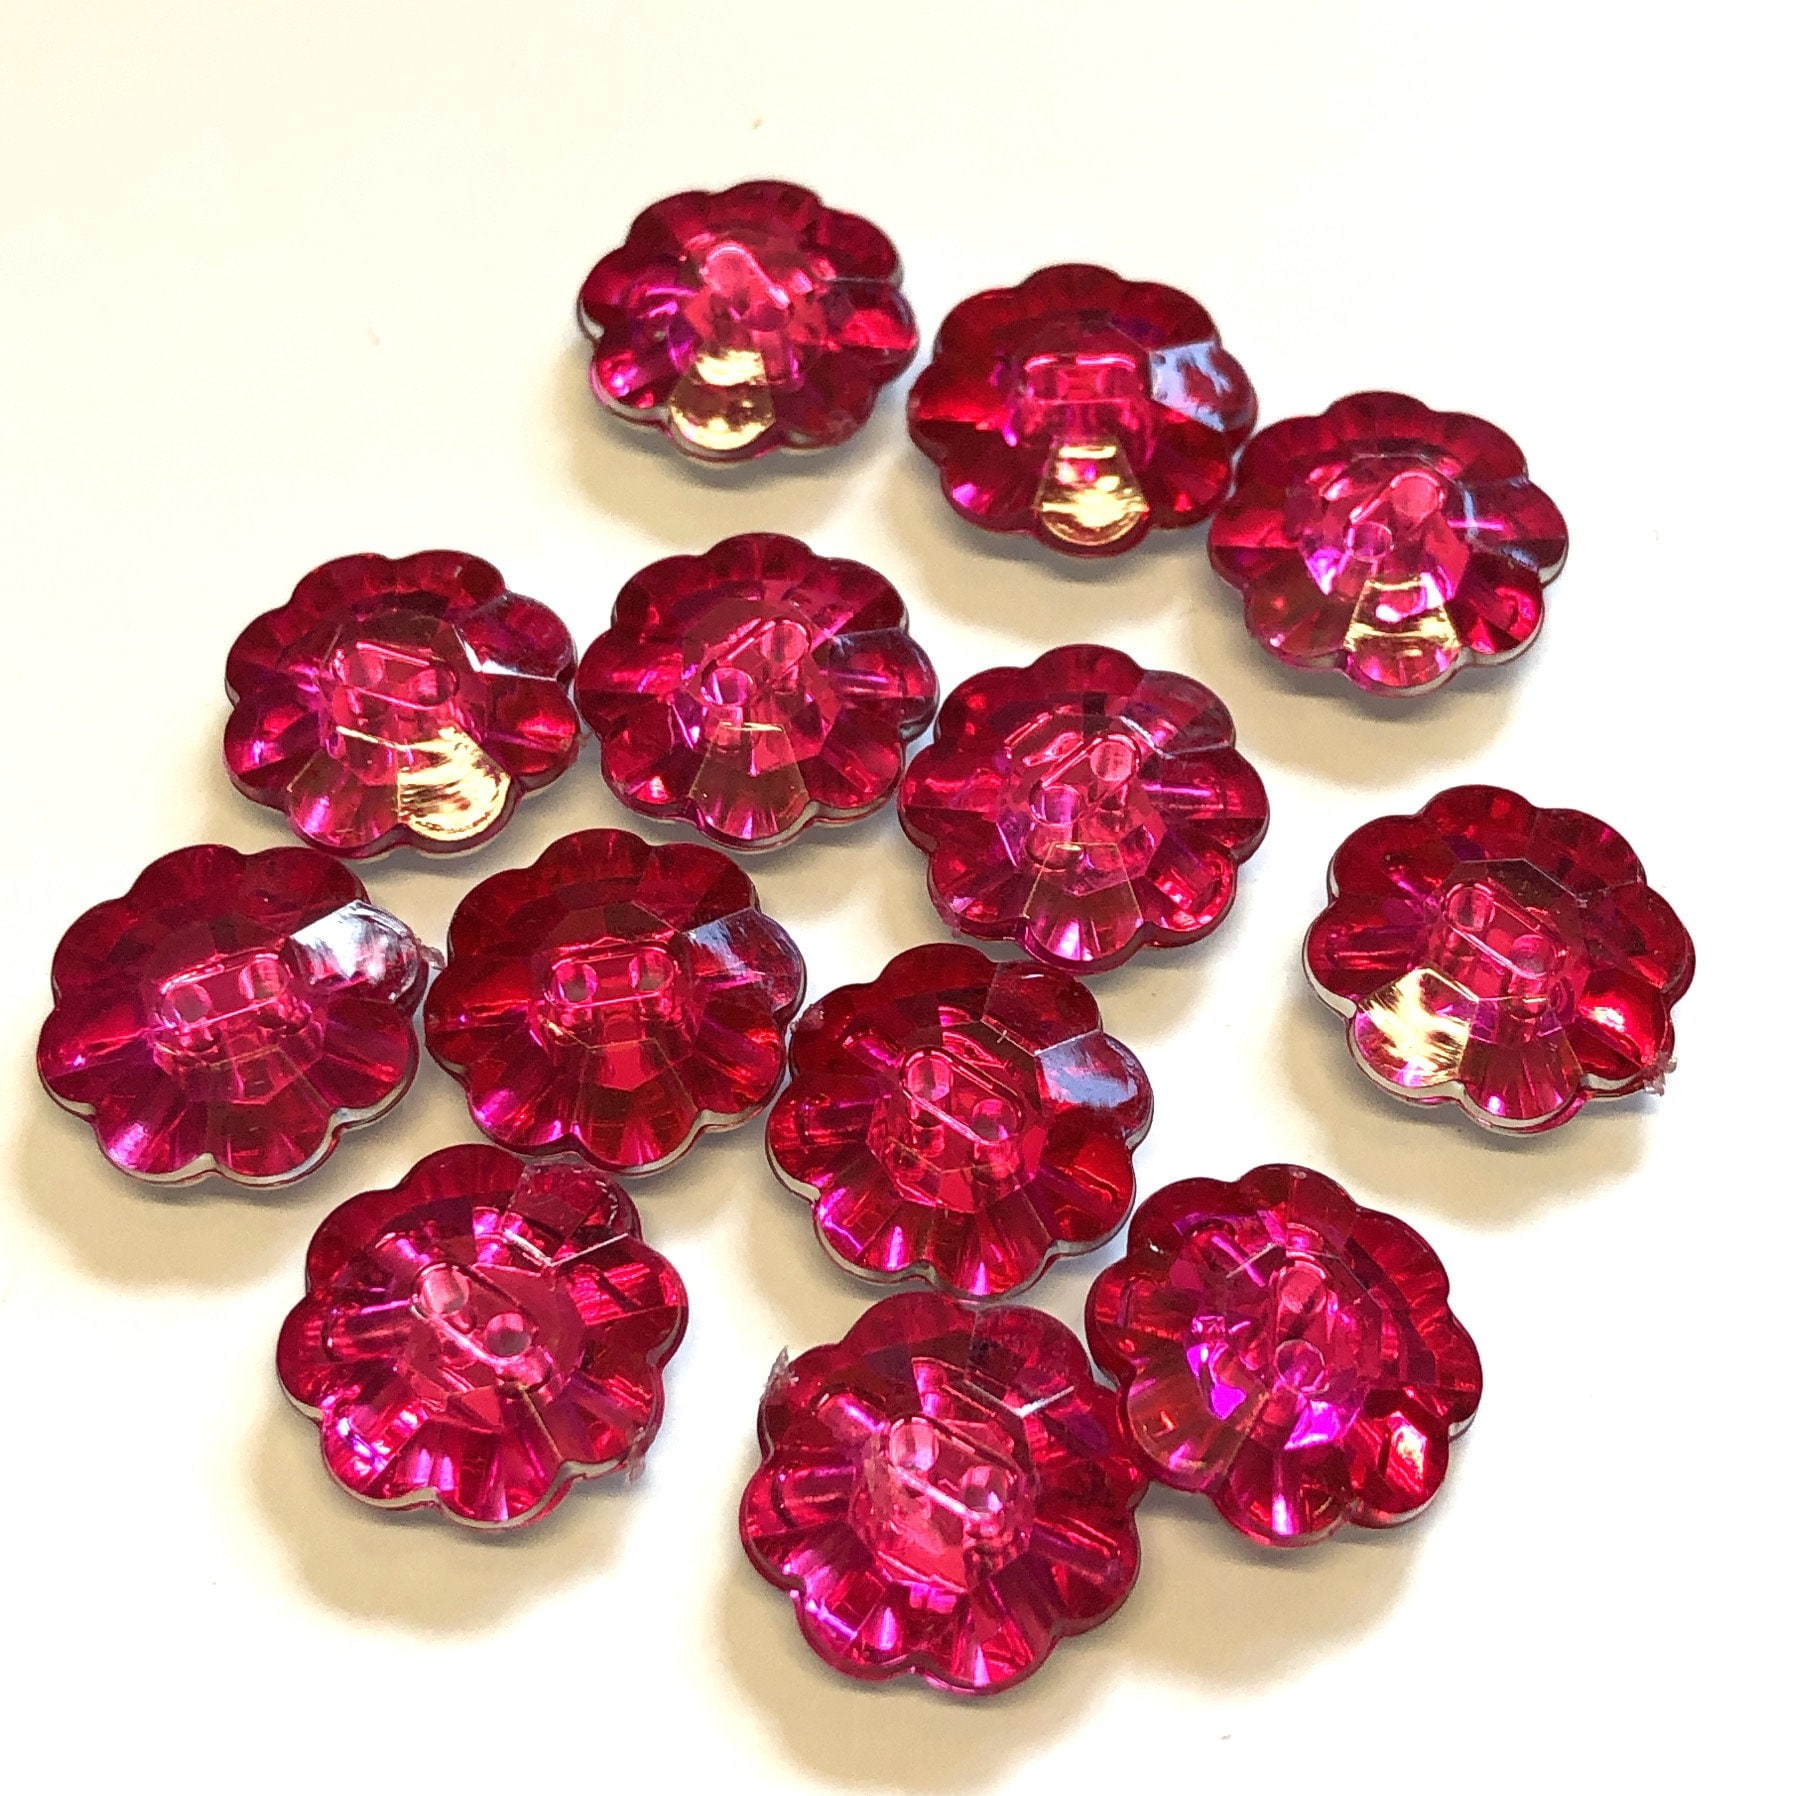 PRETTY 1950s Pink Buttons, Set of 4 Early Plastic Buttons On Original -  Ruby Lane